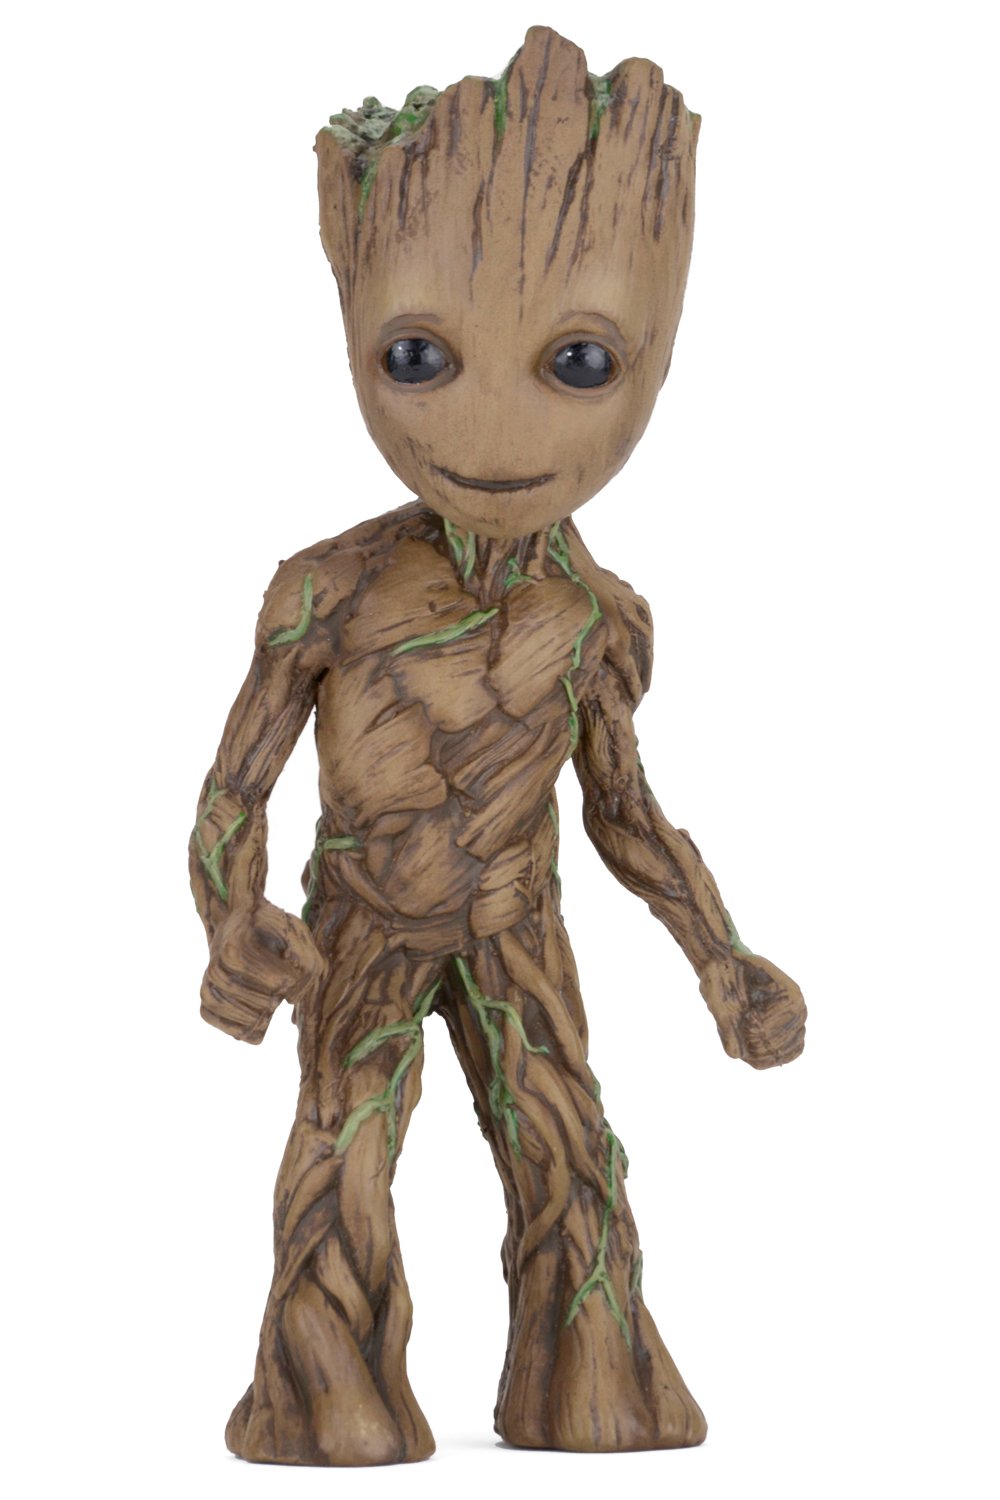 NECA Guardians of the Galaxy 2:  Baby Groot Life-Size Foam Figure